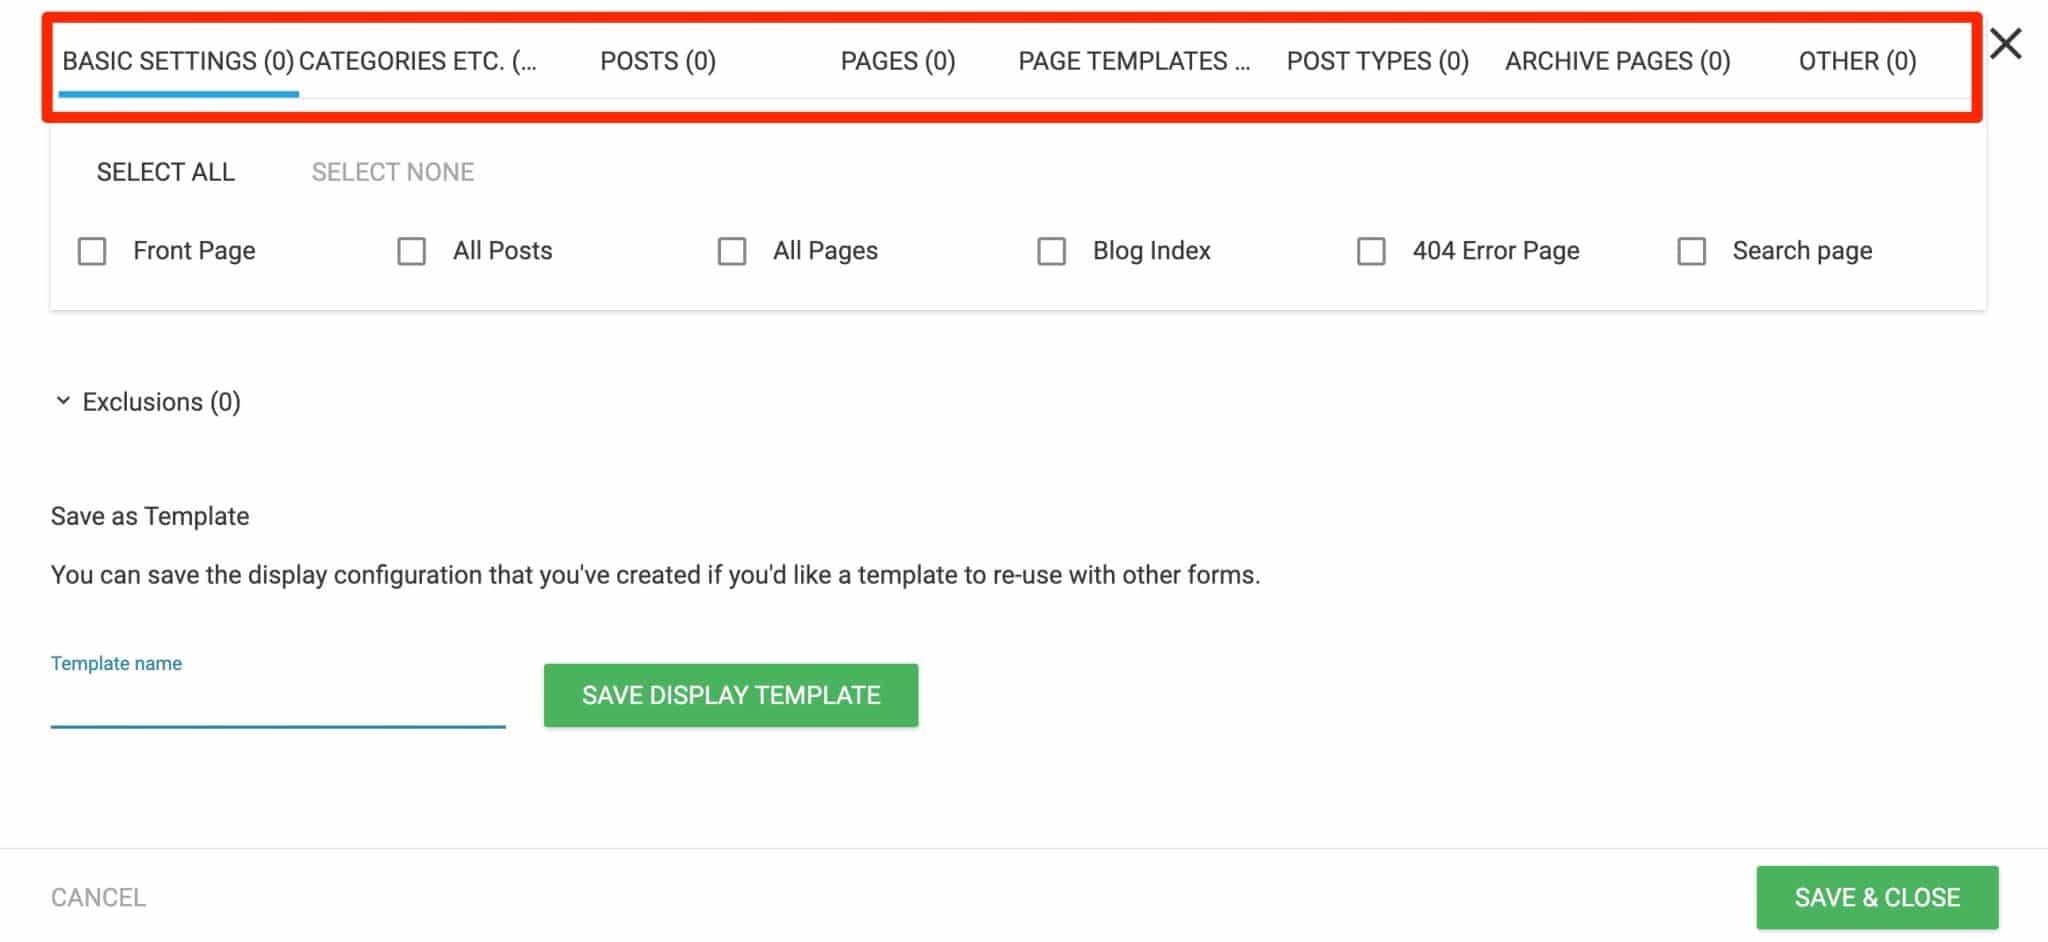 Thrive Leads settings and possibility to save display template.